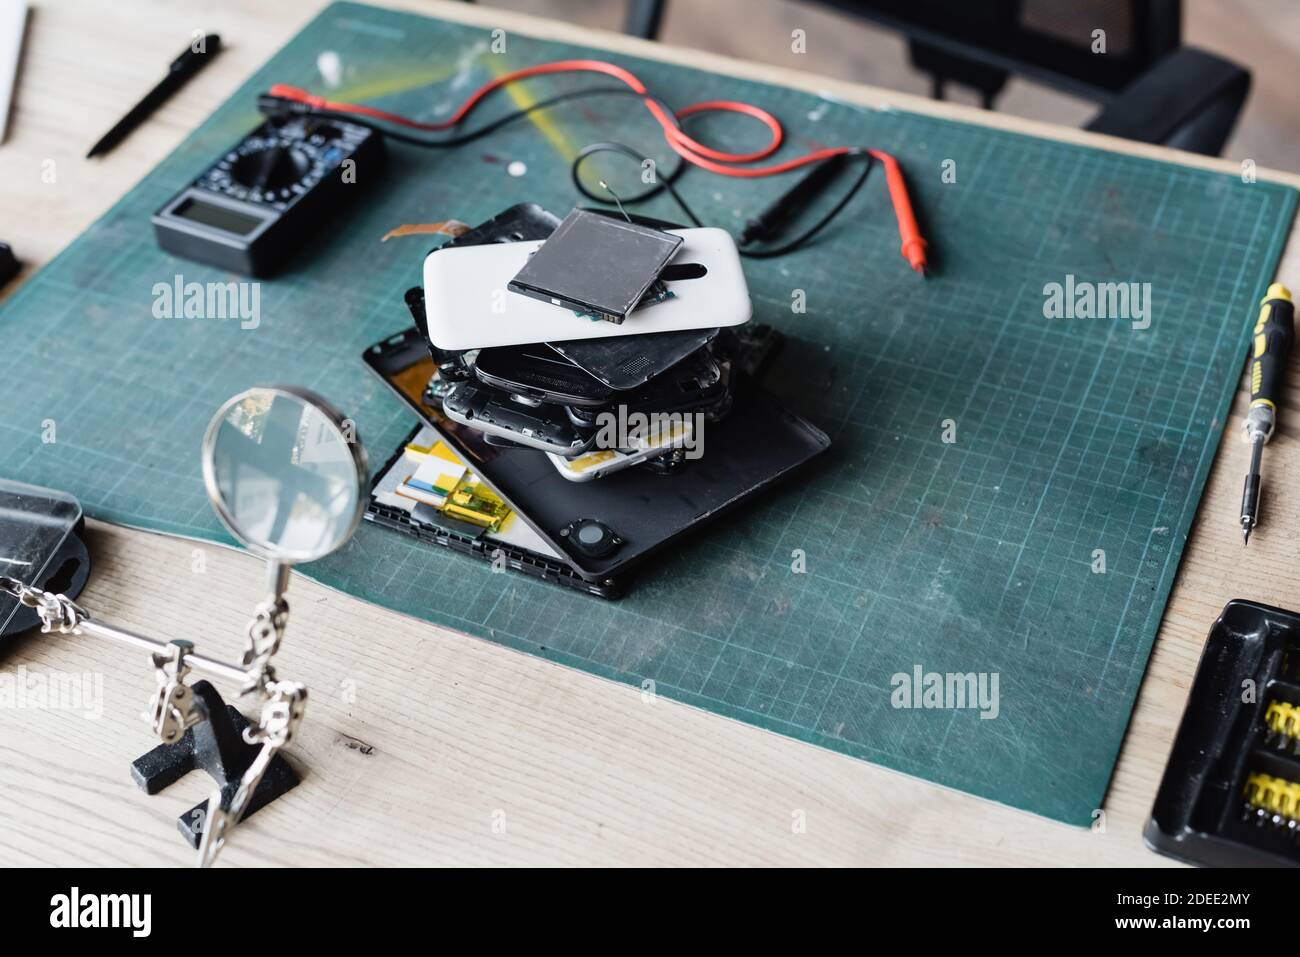 High angle view of pile of disassembled mobile phones on workplace with screwdriver, magnifier and multimeter Stock Photo